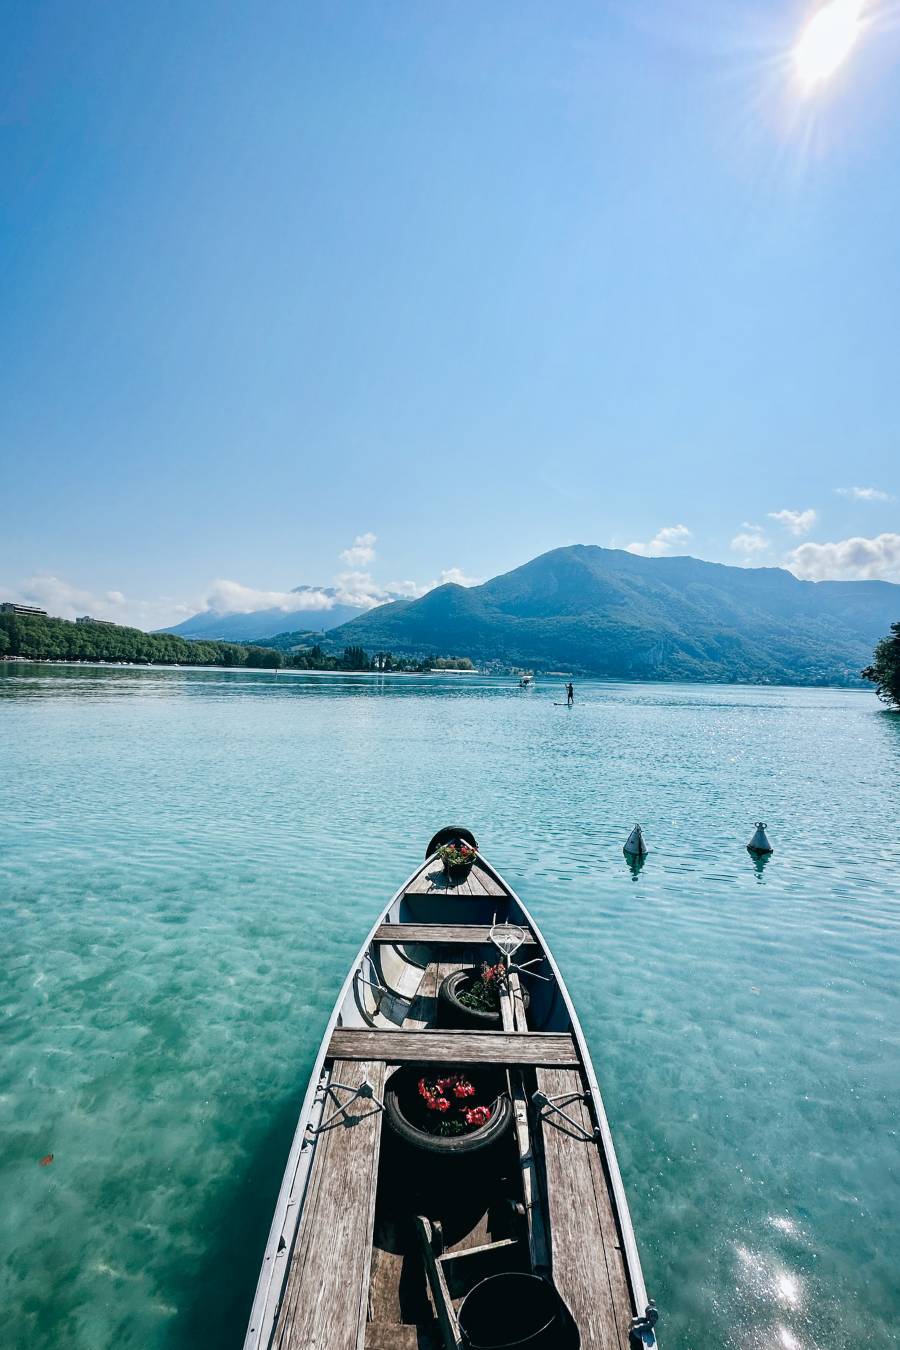 Where to stay in Annecy